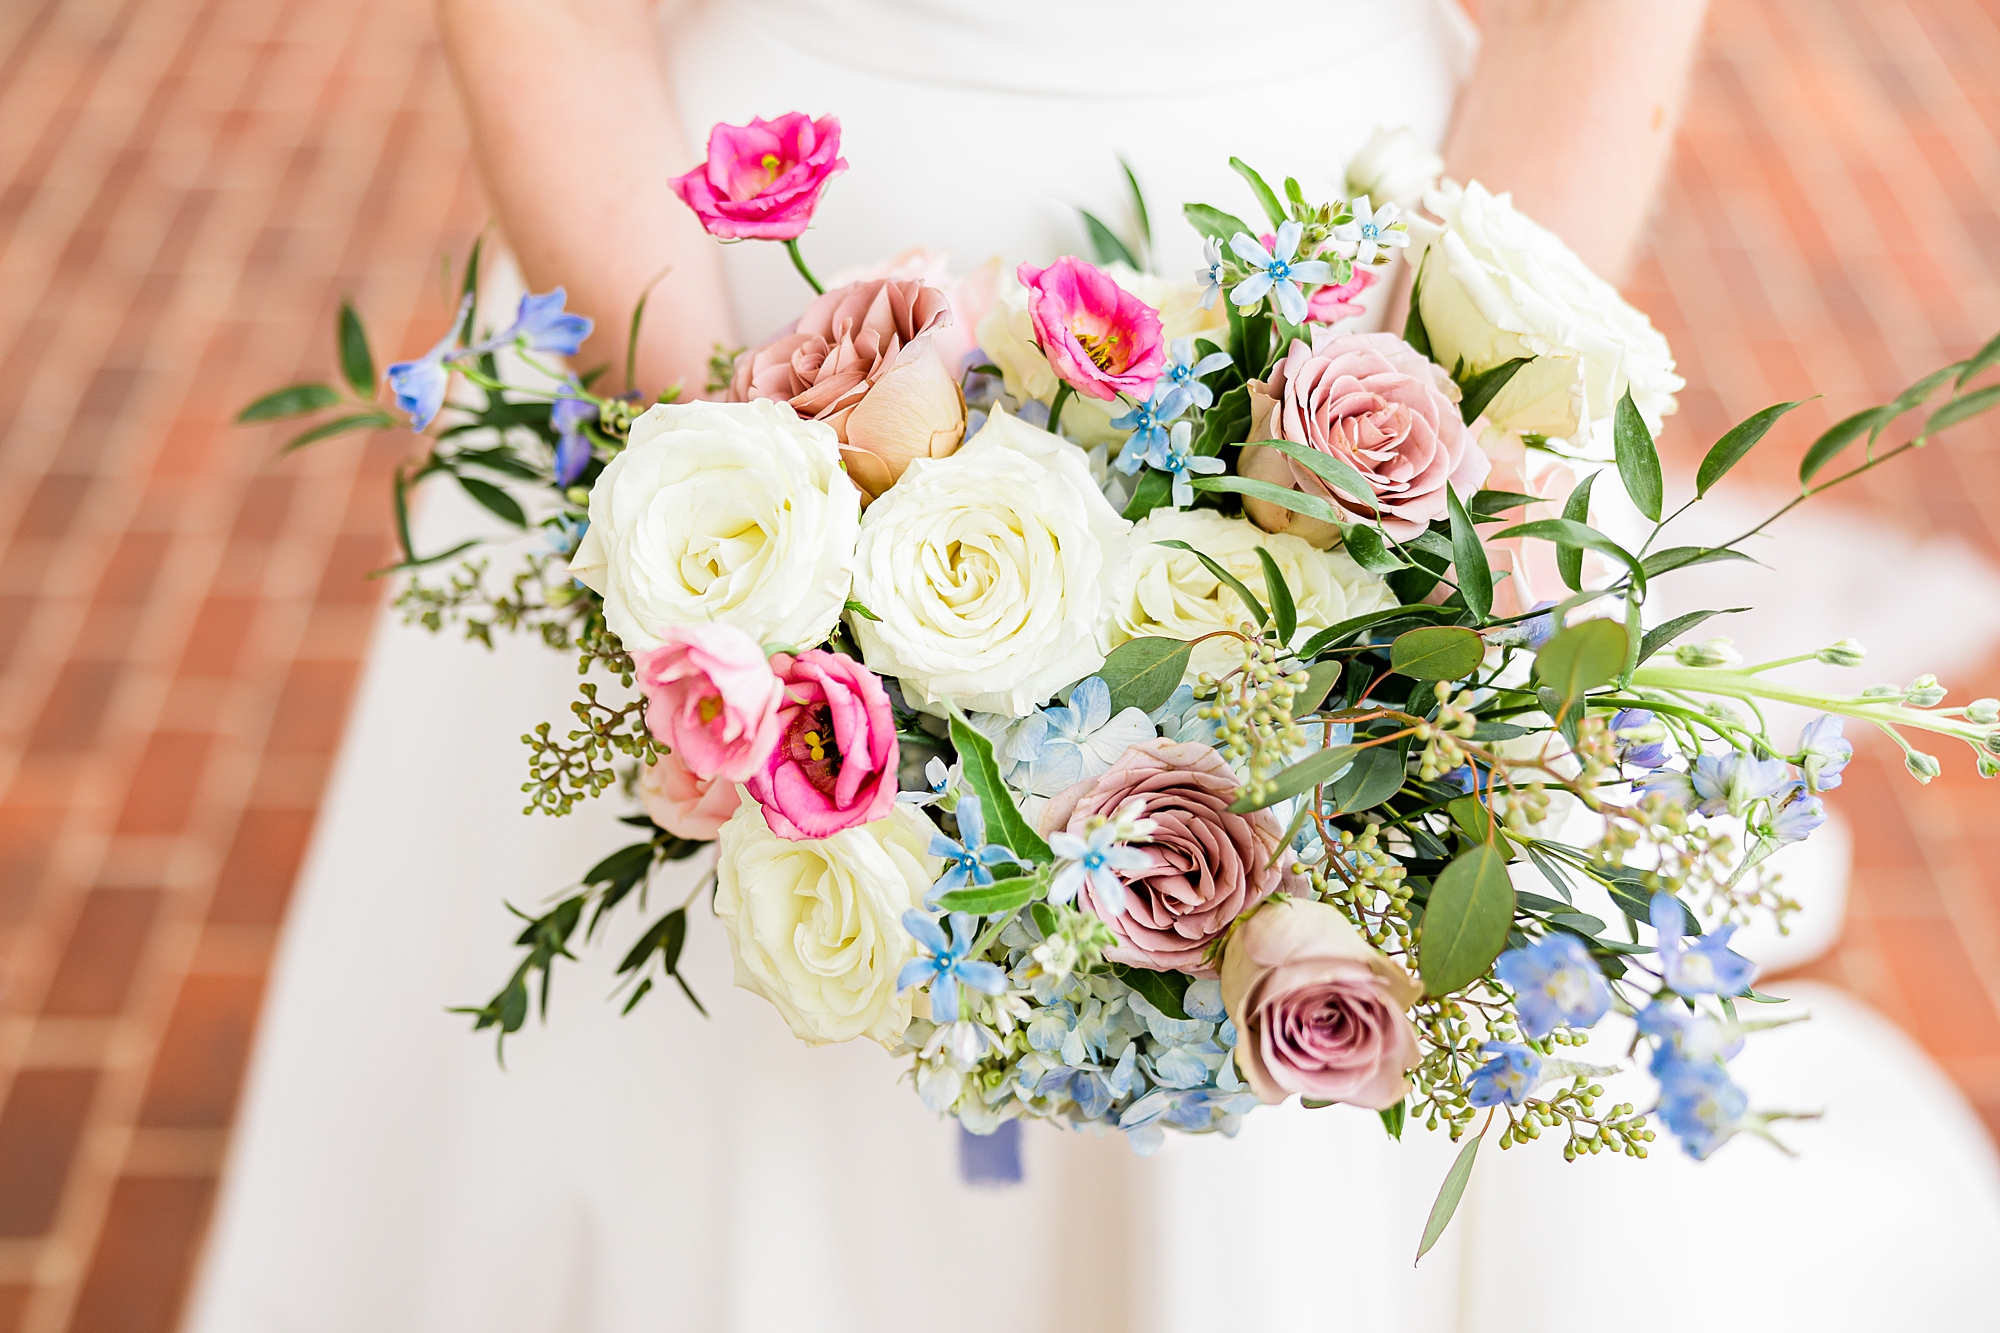 bride holds bouquet of pink, white, and blue flowers